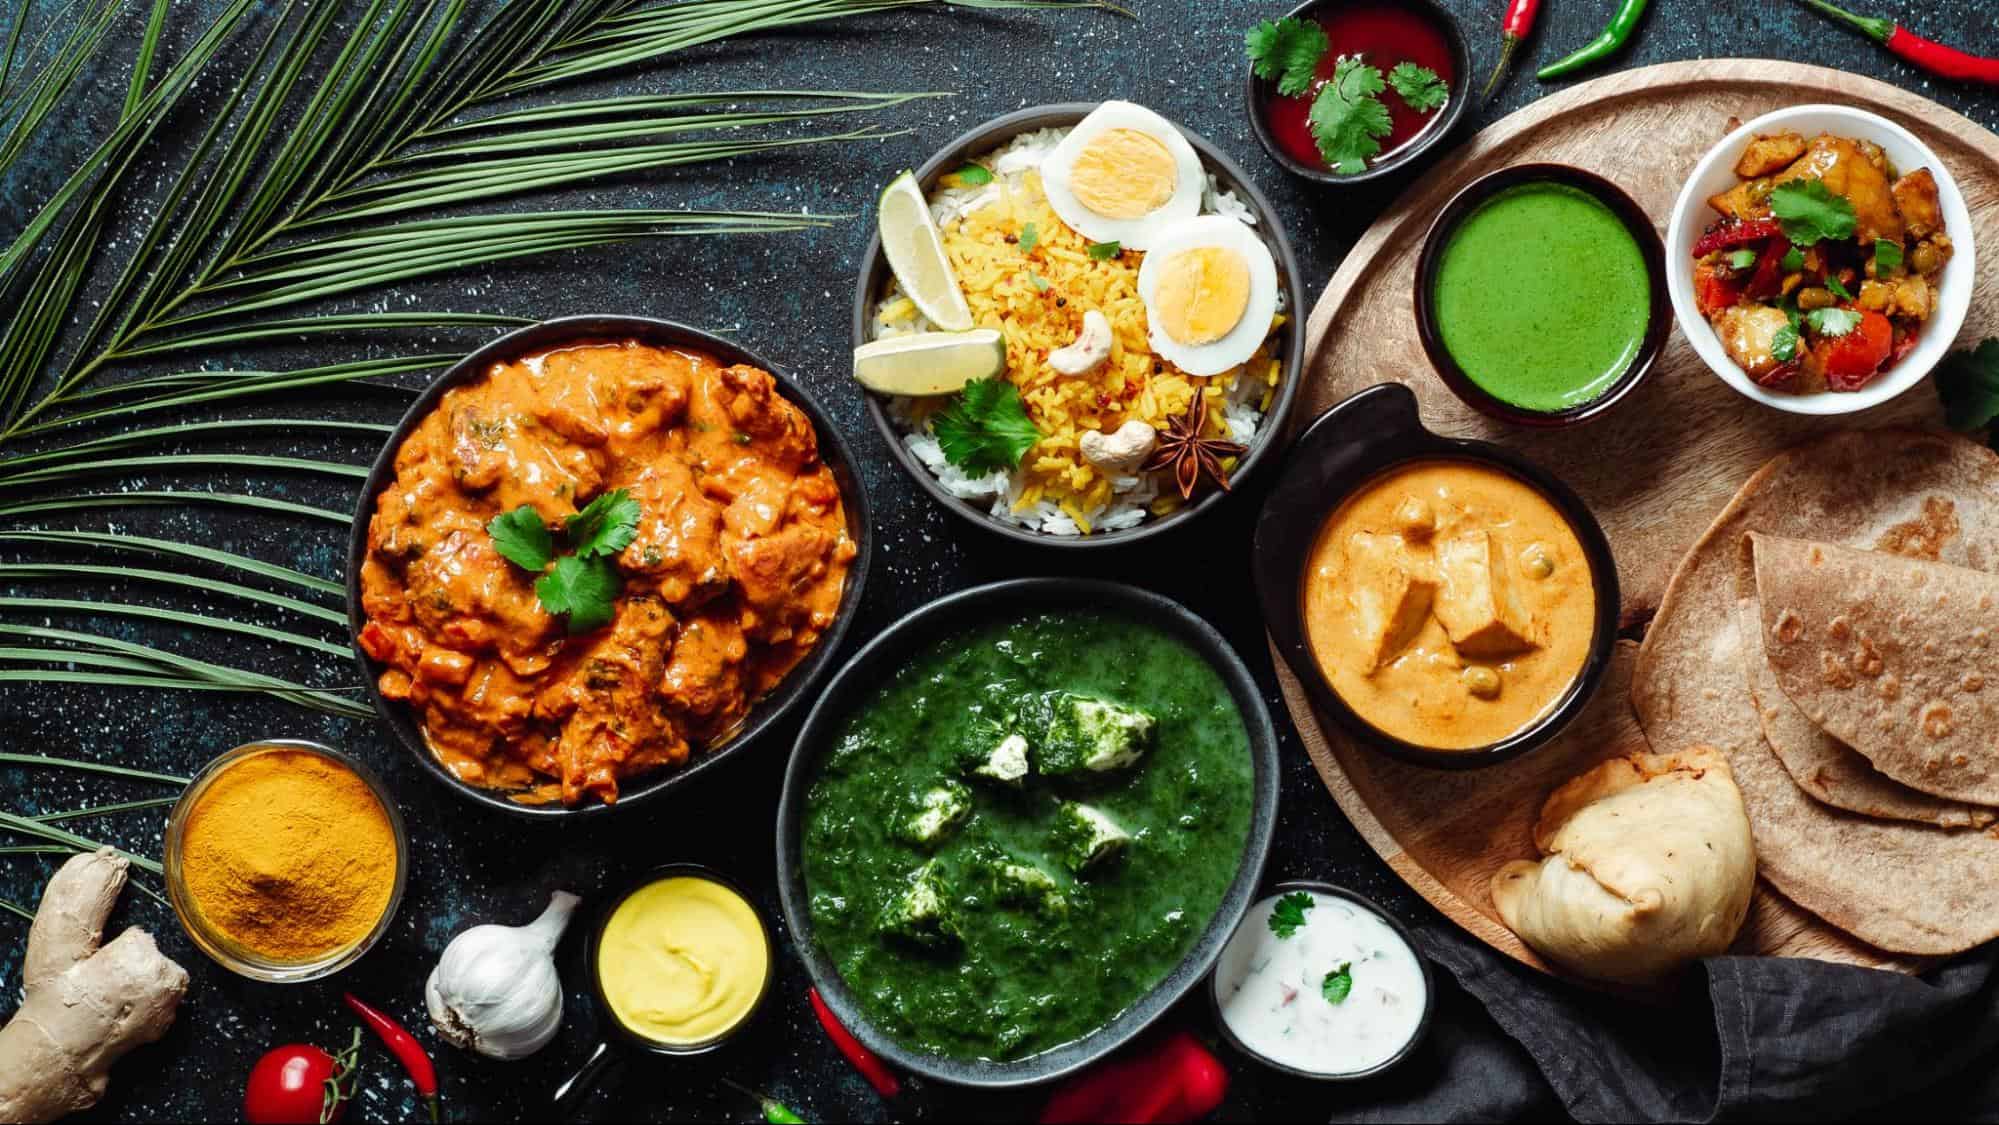 An Overview of India’s Regional Cuisines